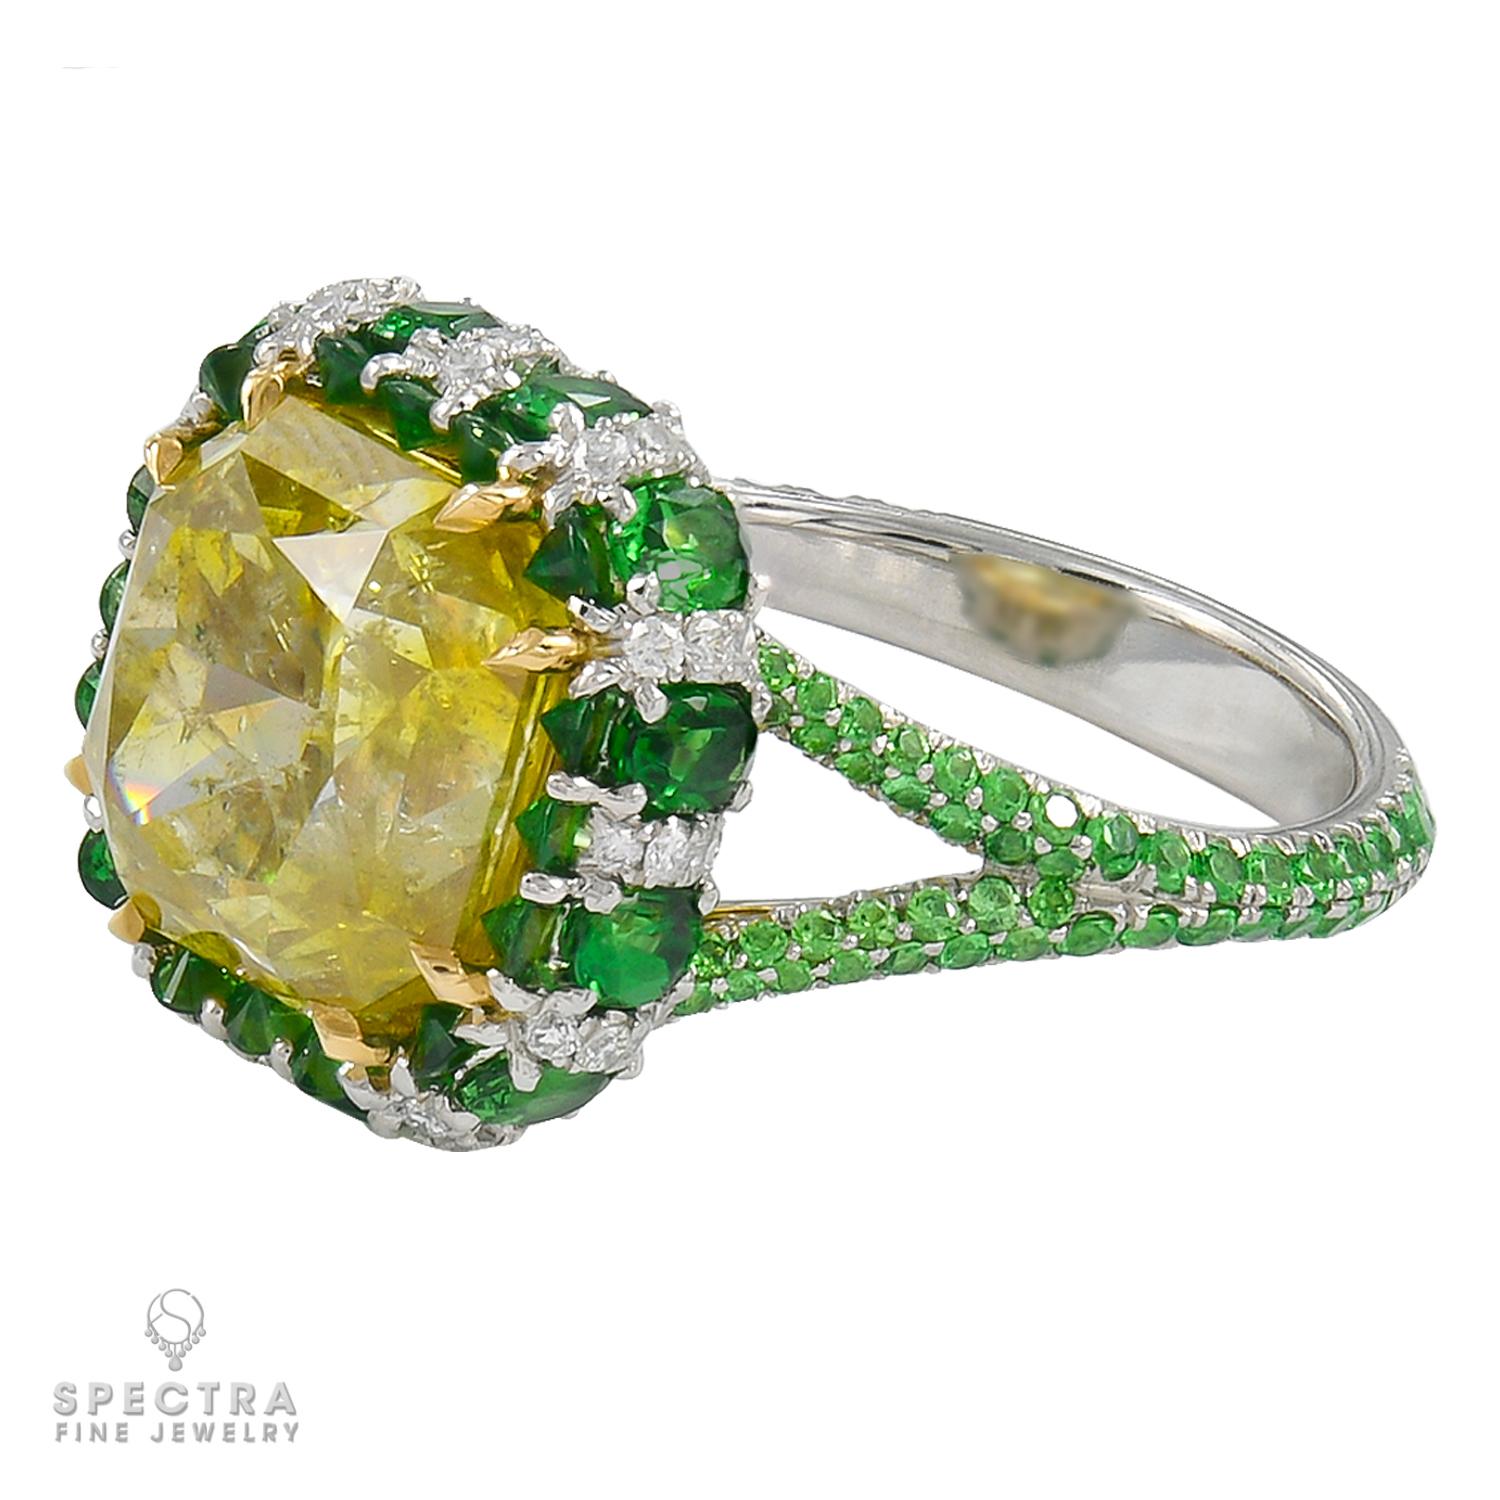 A cocktail ring adorned with a fancy deep yellow diamond, square radiant-cut, weighing a total of 5.87 carats.
The center diamond is certified by the GIA.
It's accented by green tsavorite gemstones and white diamonds. 
Metal is platinum, gross